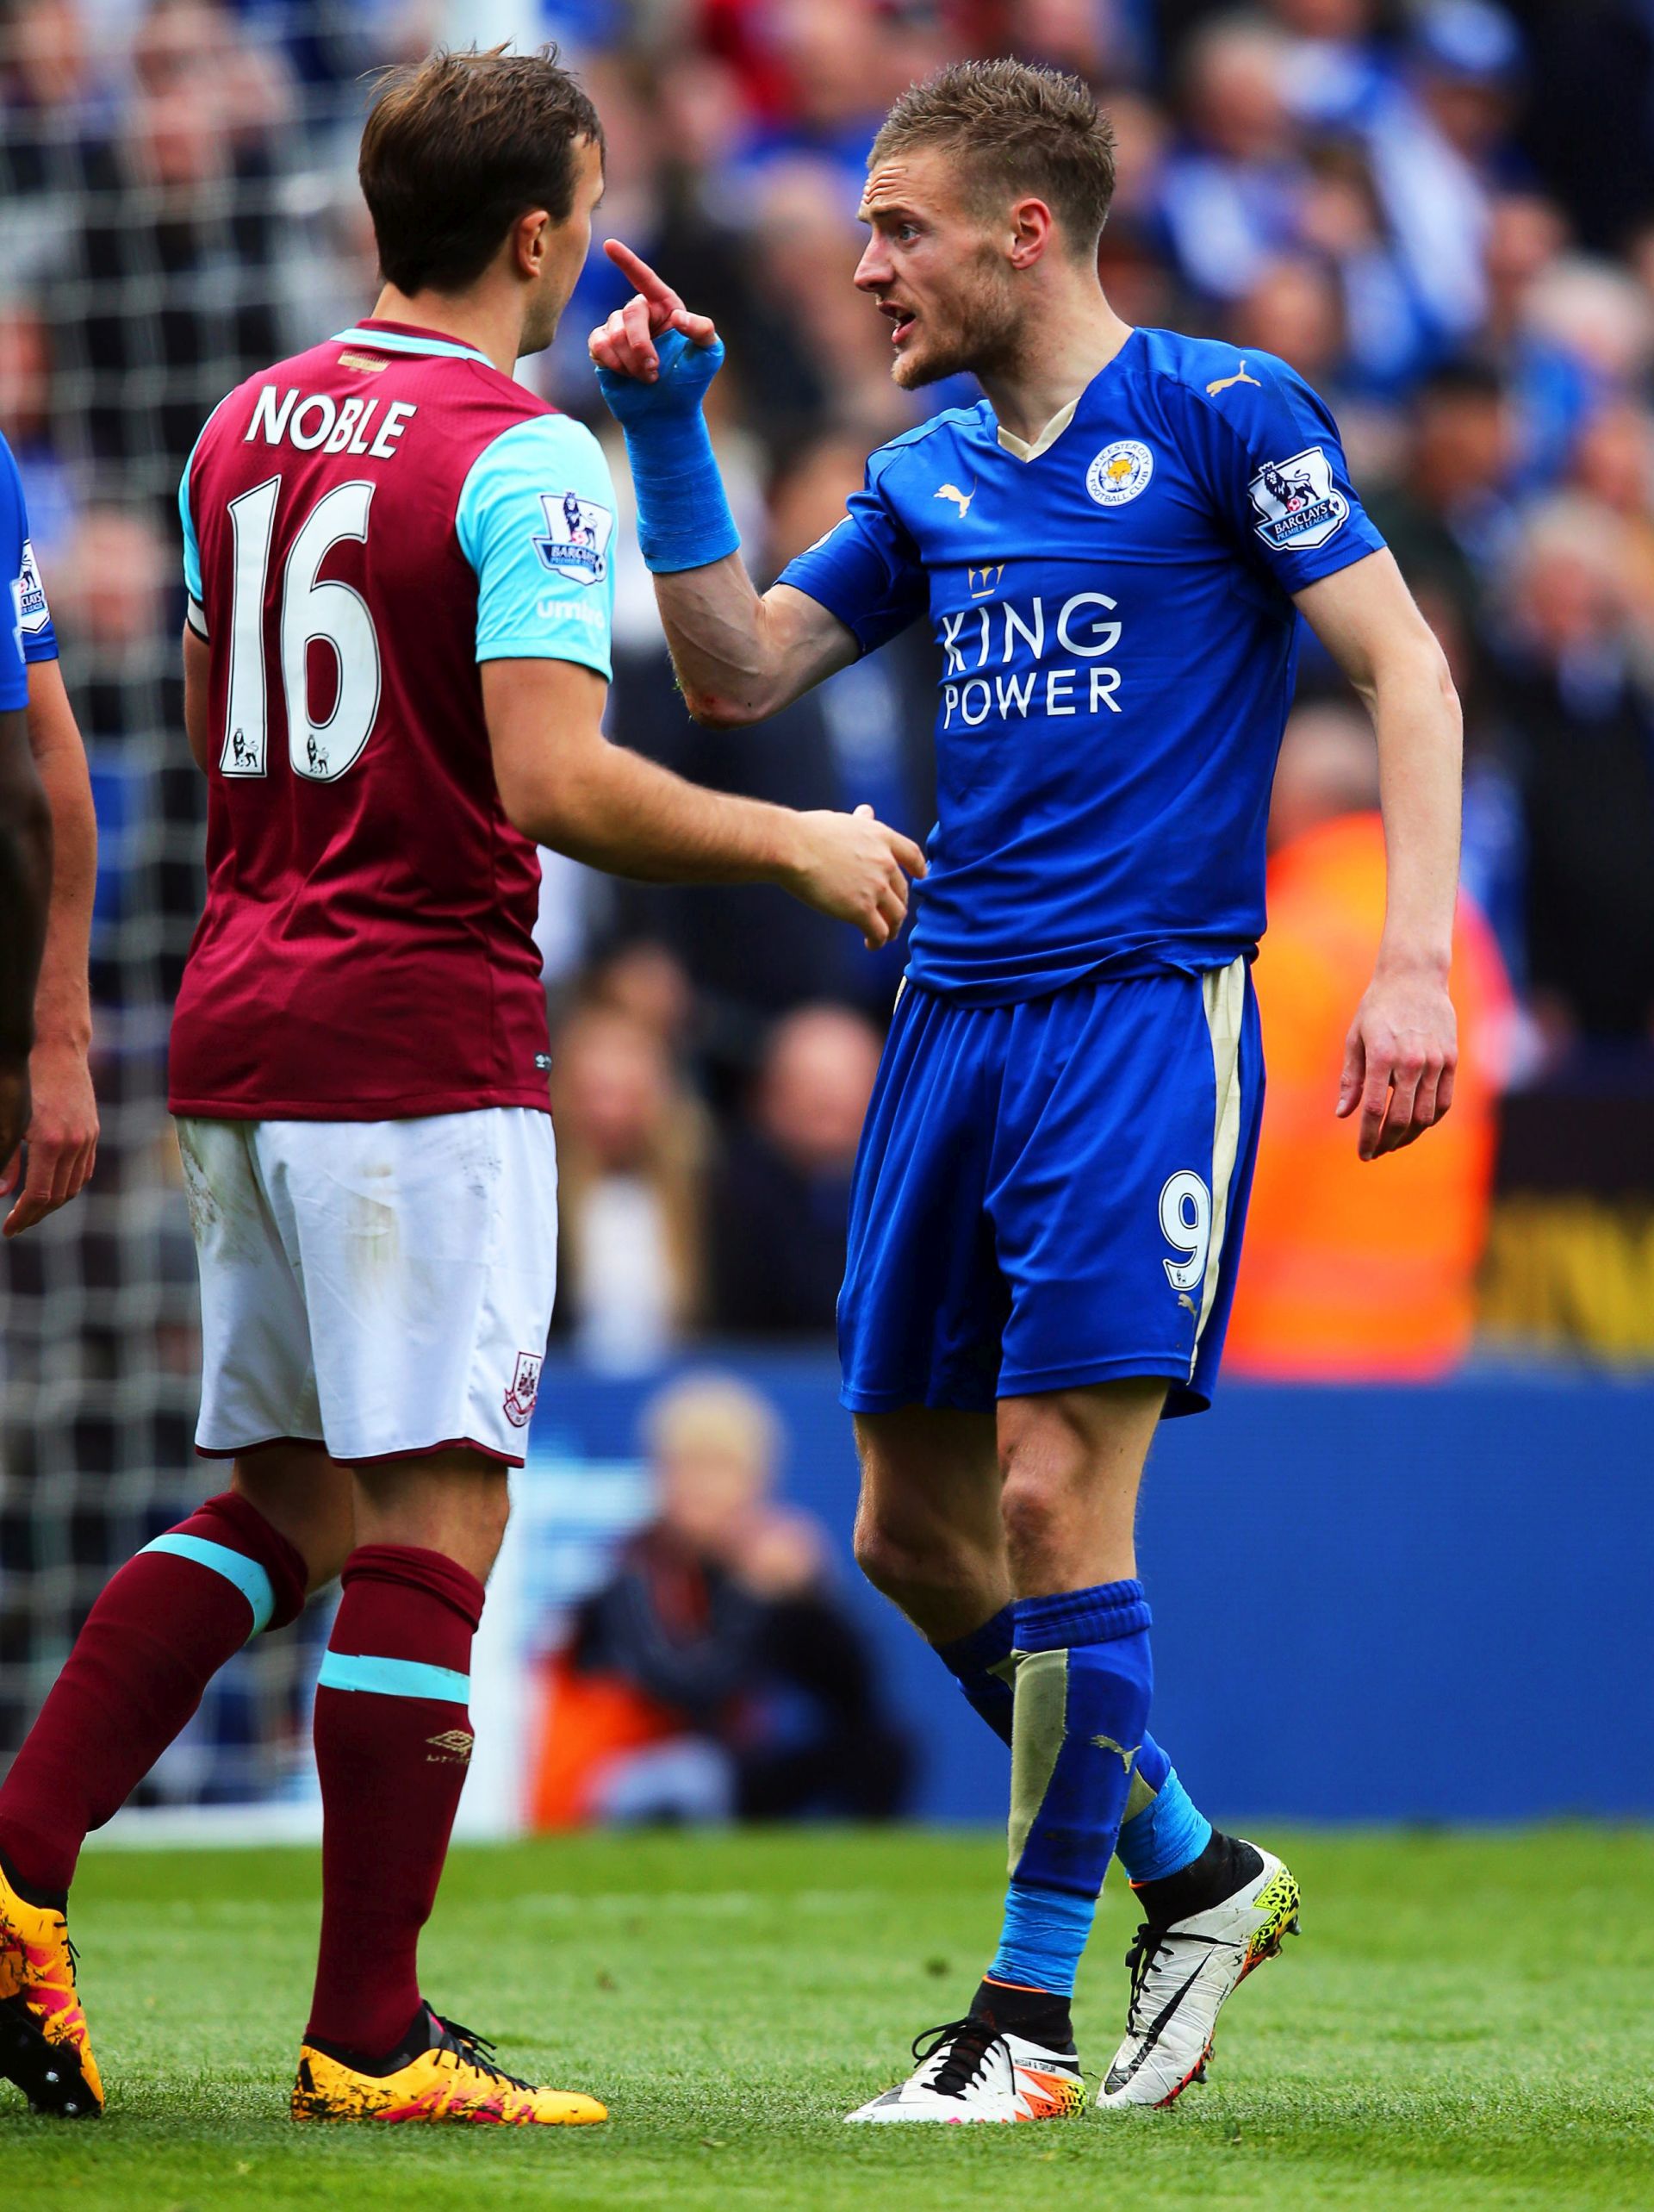 epa05263874 Leicester City's Jamie Vardy (R) reacts after being sent off during the English Premier League soccer match between Leicester City and West Ham United at The King Power Stadium in Leicester, Britain, 17 April 2016.  EPA/TIM KEETON EDITORIAL USE ONLY. No use with unauthorized audio, video, data, fixture lists, club/league logos or 'live' services. Online in-match use limited to 75 images, no video emulation. No use in betting, games or single club/league/player publications.